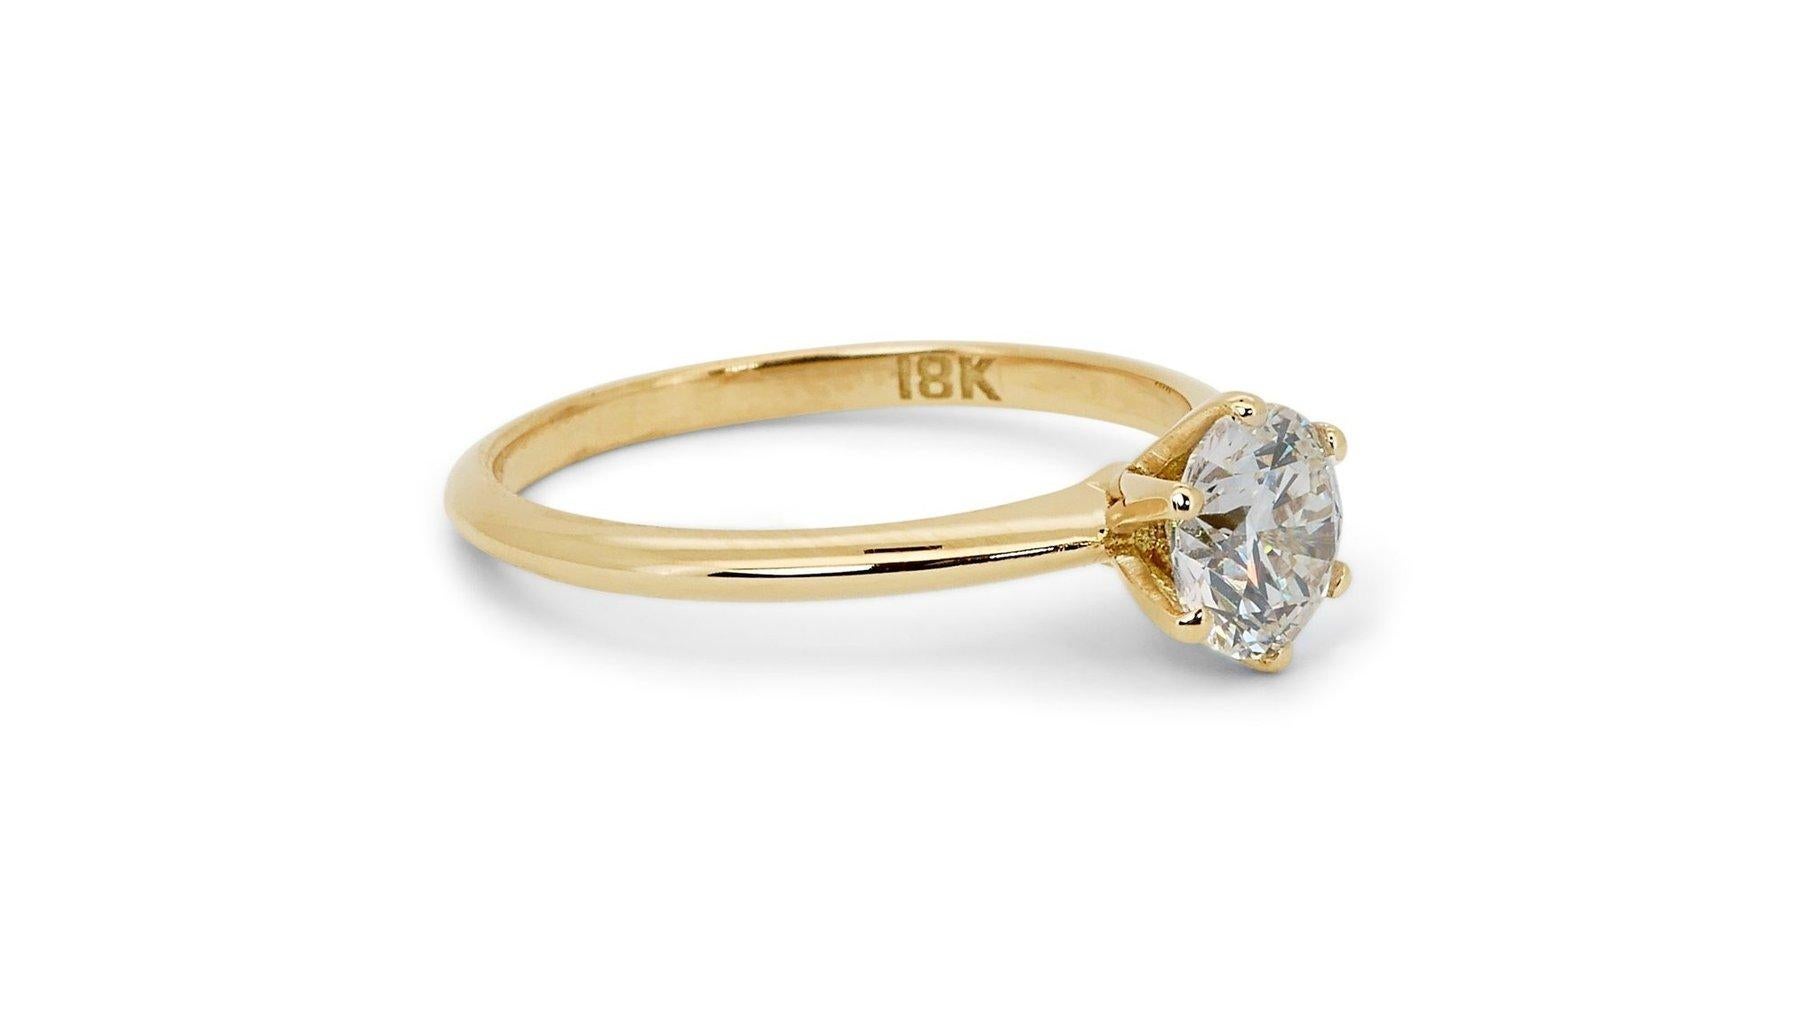 Lustrous 1.07ct Diamond Solitaire Ring in 18k Yellow Gold - GIA Certified

Embrace timeless elegance with this stunning 18k yellow gold diamond solitaire ring, featuring a 1.07-carat round diamond. Ideal for any occasion, this ring encapsulates